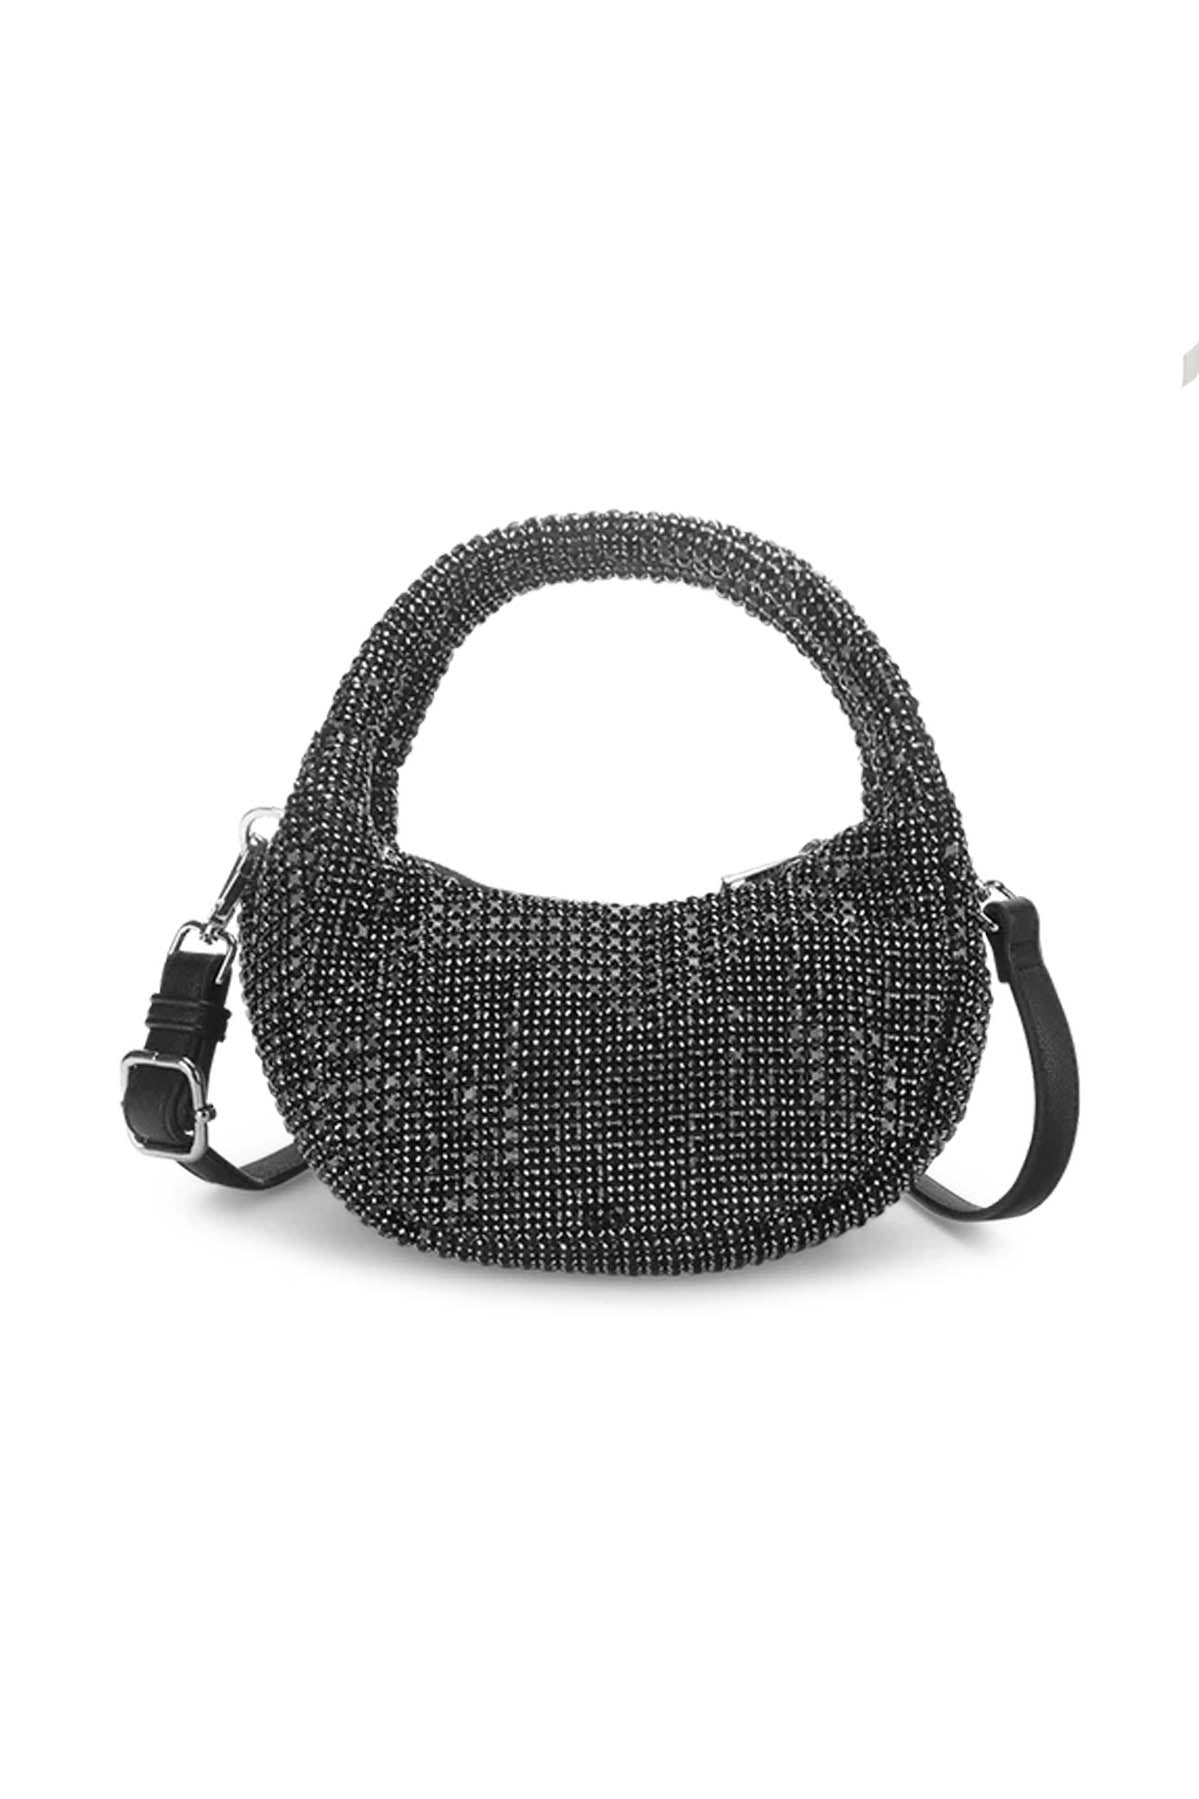 THE MINI MONA PARTY HANDBAG - SPARKLY BLACK - EXCLUSIVE Bags from SILFEN - Just €79.99! SHOP NOW AT IAMINHATELOVE BOTH IN STORE FOR CYPRUS AND ONLINE WORLDWIDE @ IAMINHATELOVE.COM